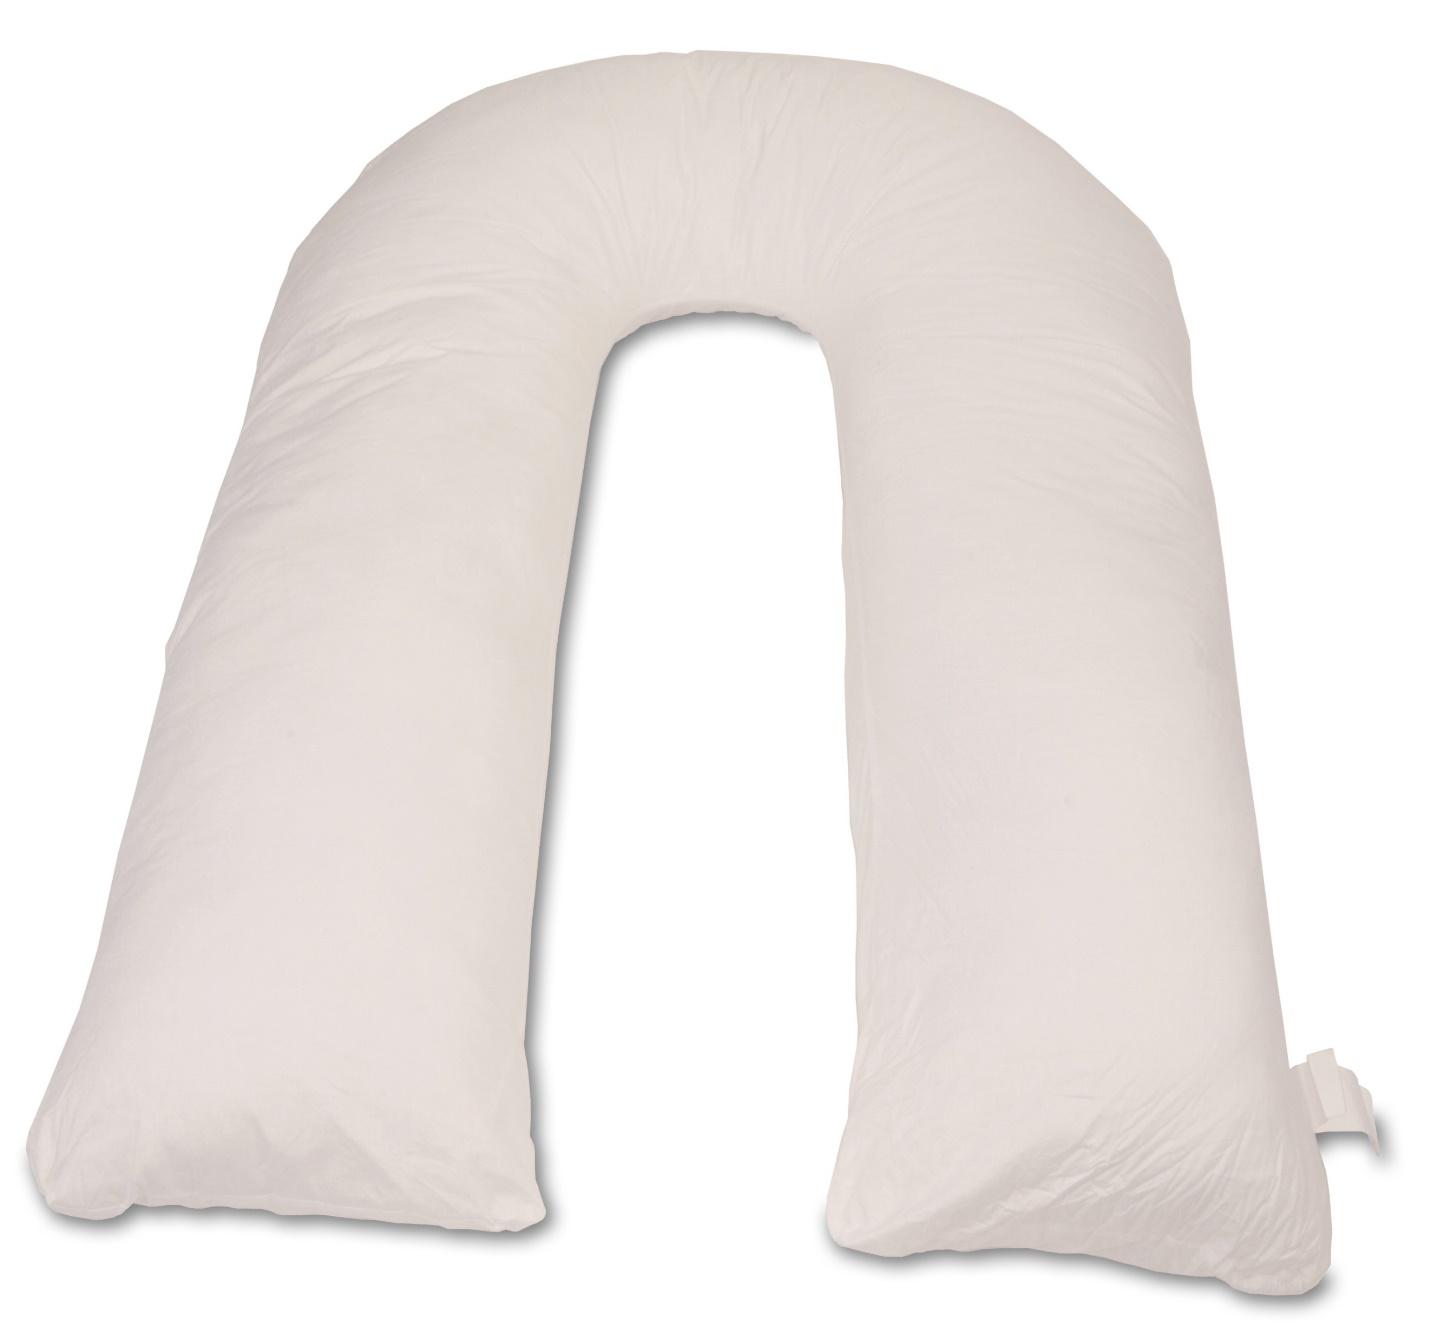 U shaped body pillows are good for neck pain relief